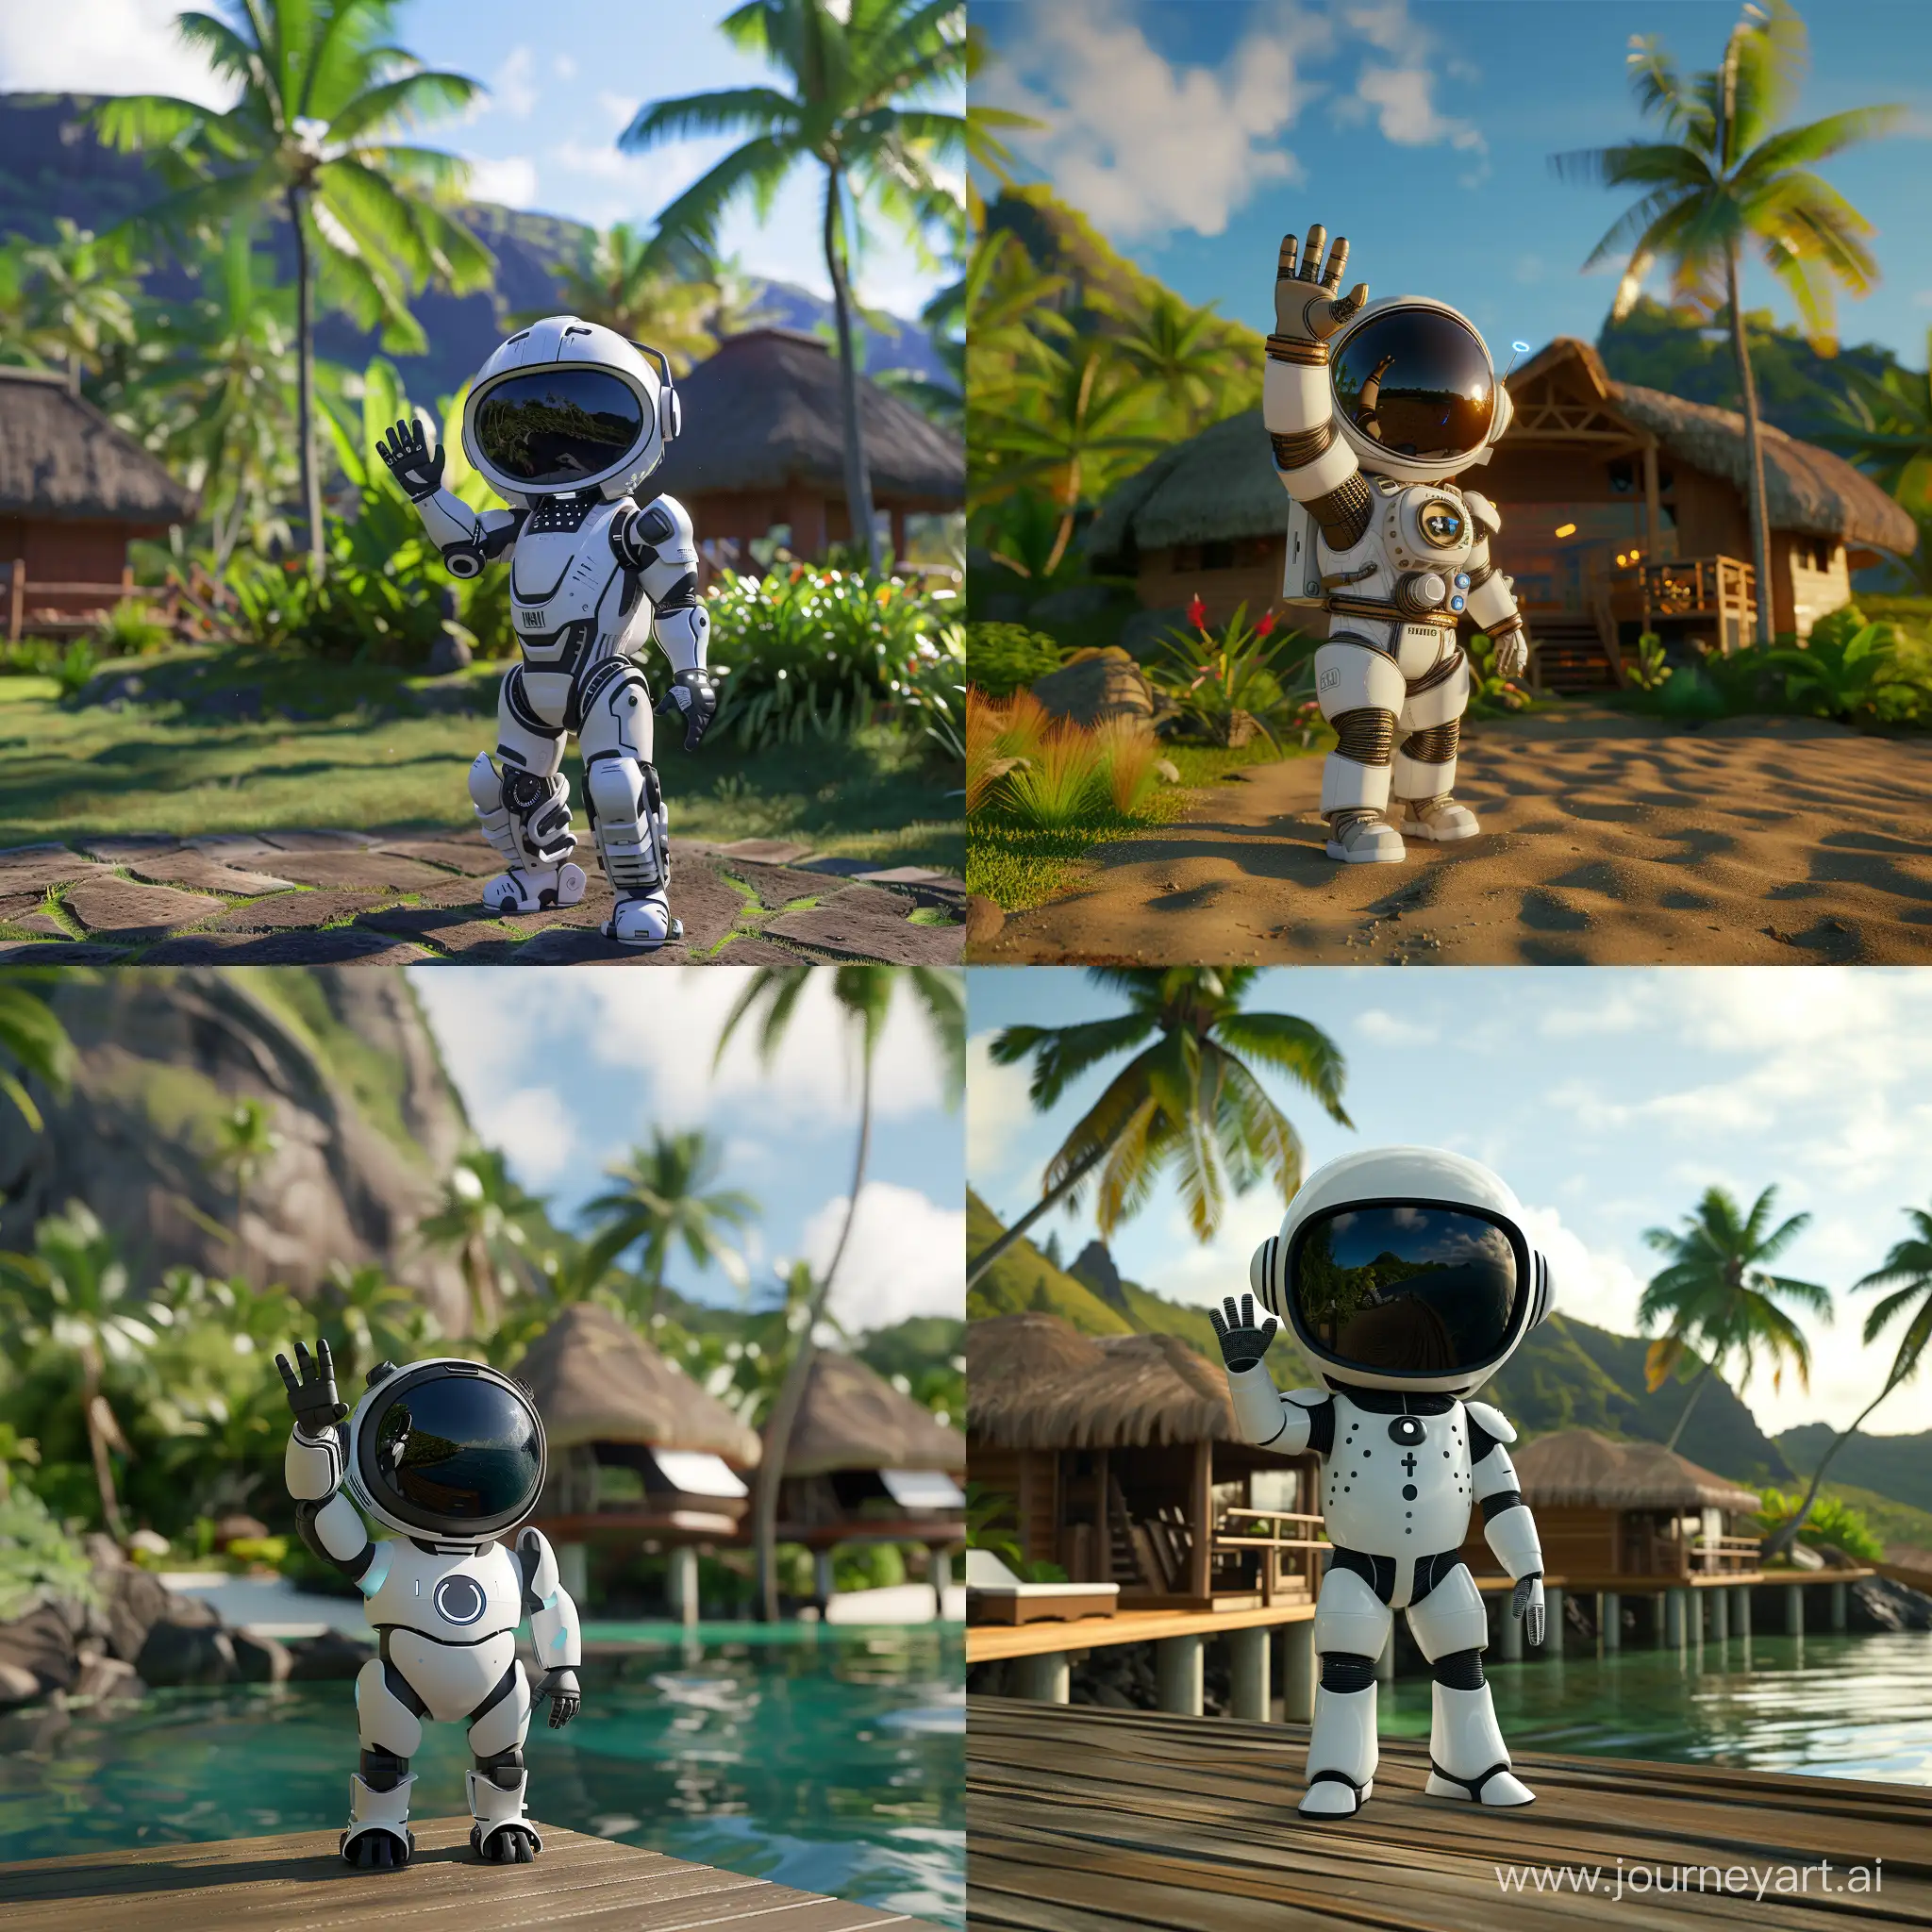 Astro from playstation in Fiji, Standing near a bure, waving hi to the camera, photographic, photorealistic, 8k